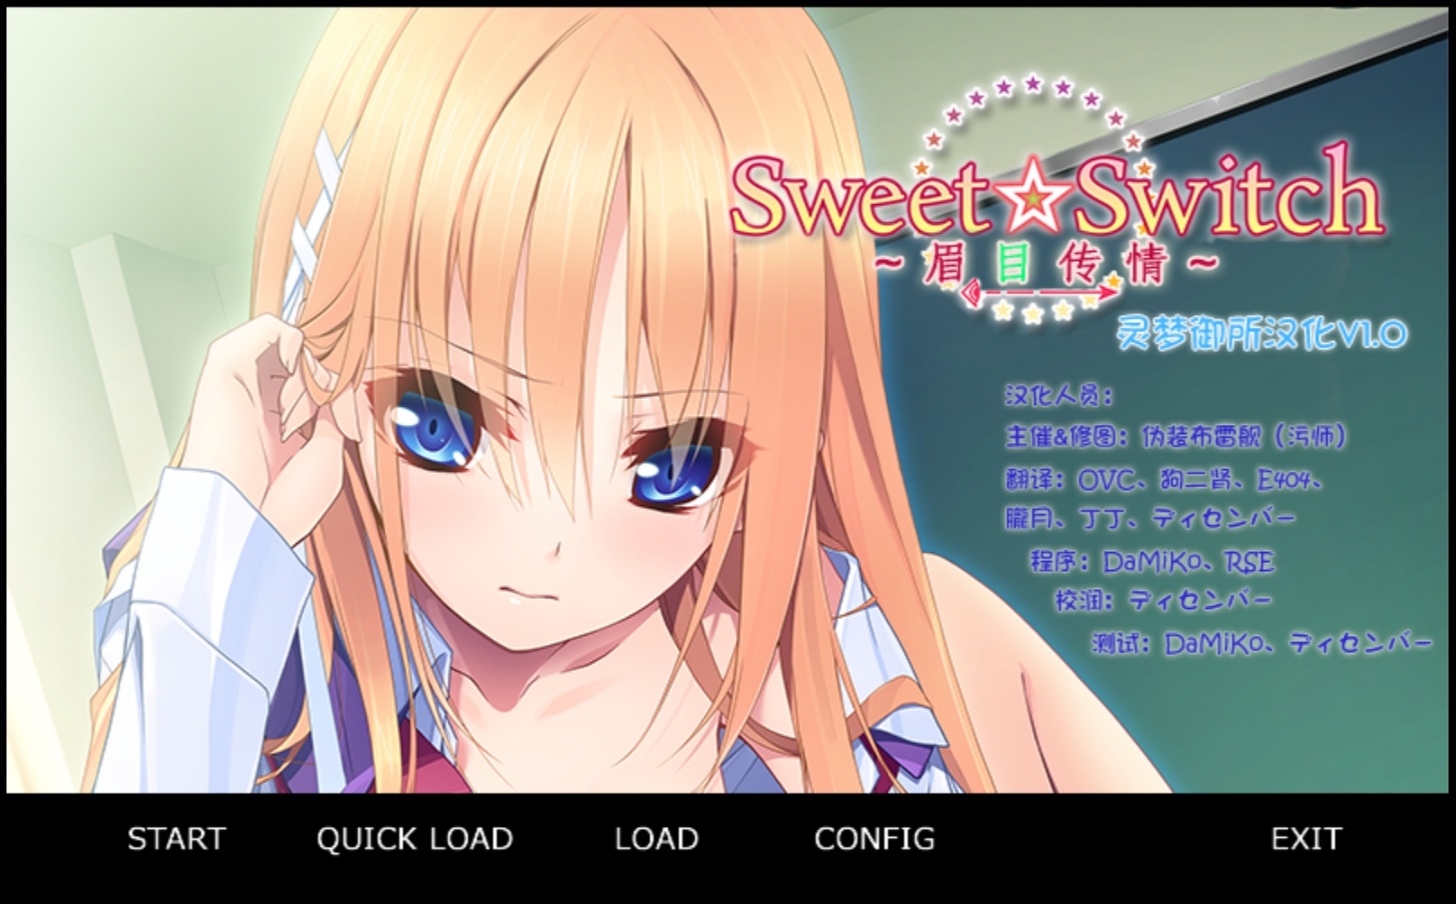 GCivOmbcMEYfPux - Sweet☆Switch 眉目传情 KRKR